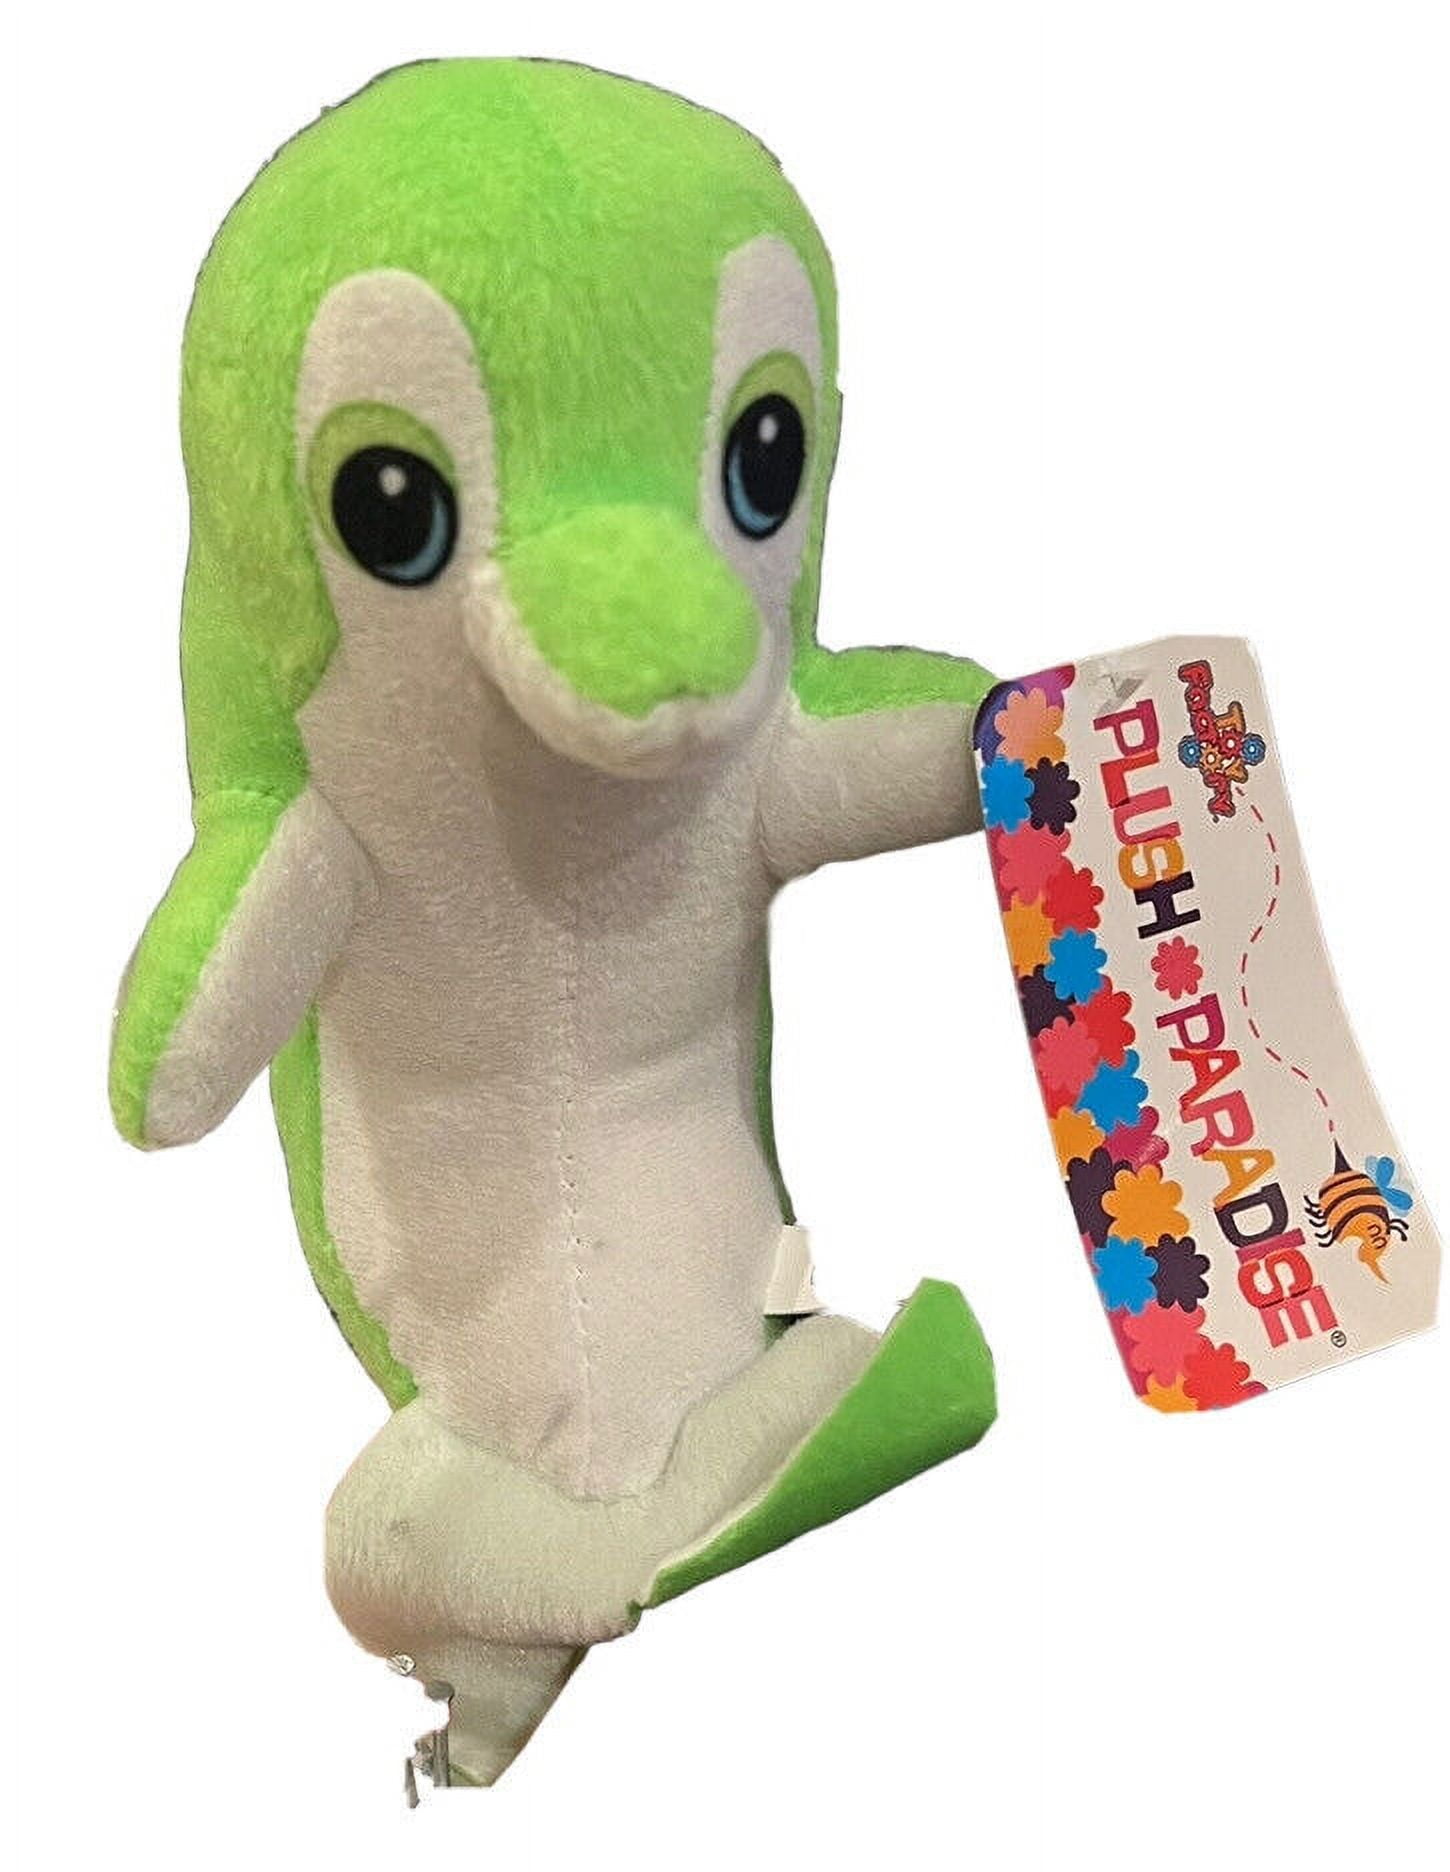  OZIF Green Plush11.8 for Fans and Beautifully Plushies